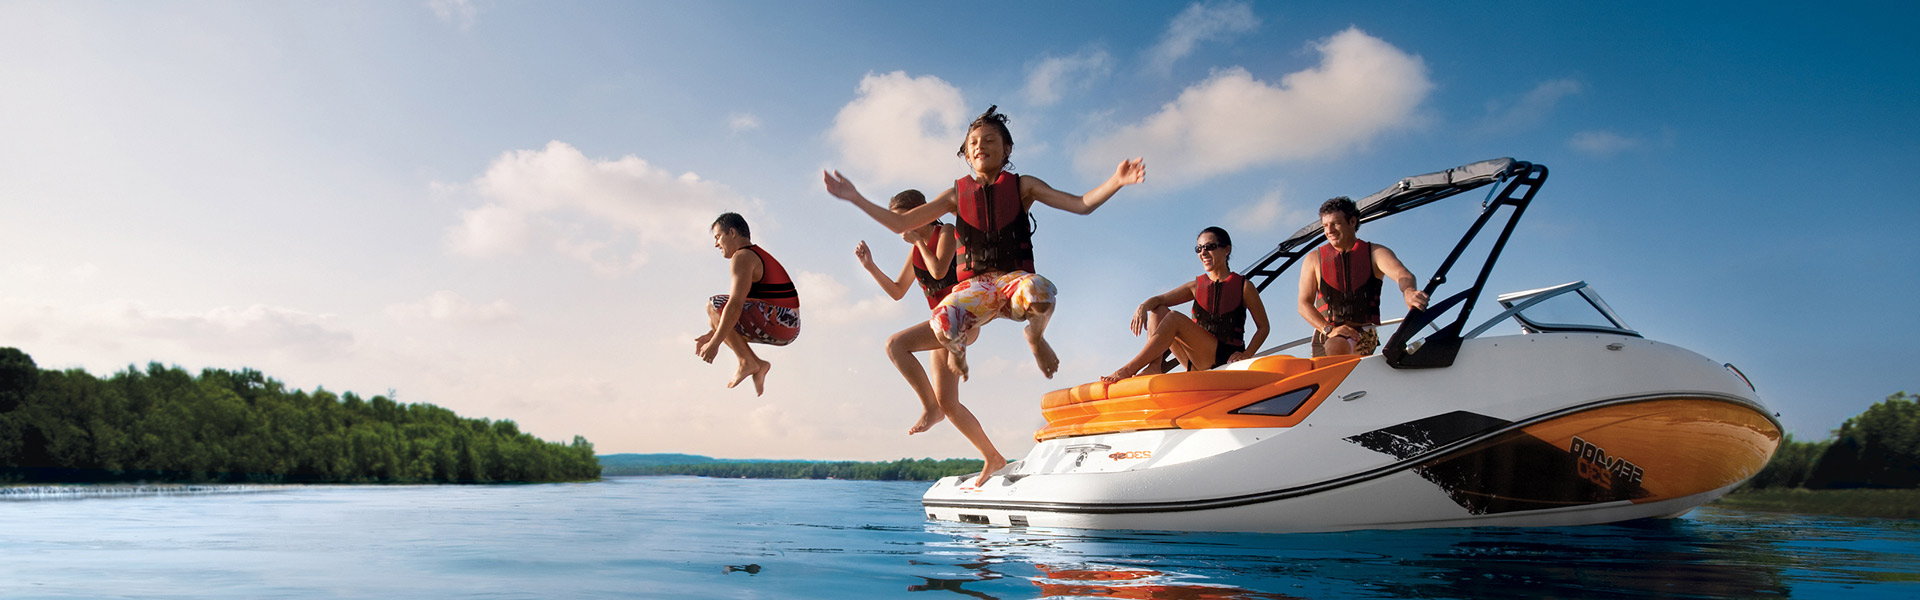 Image of kids jumping out of a boat